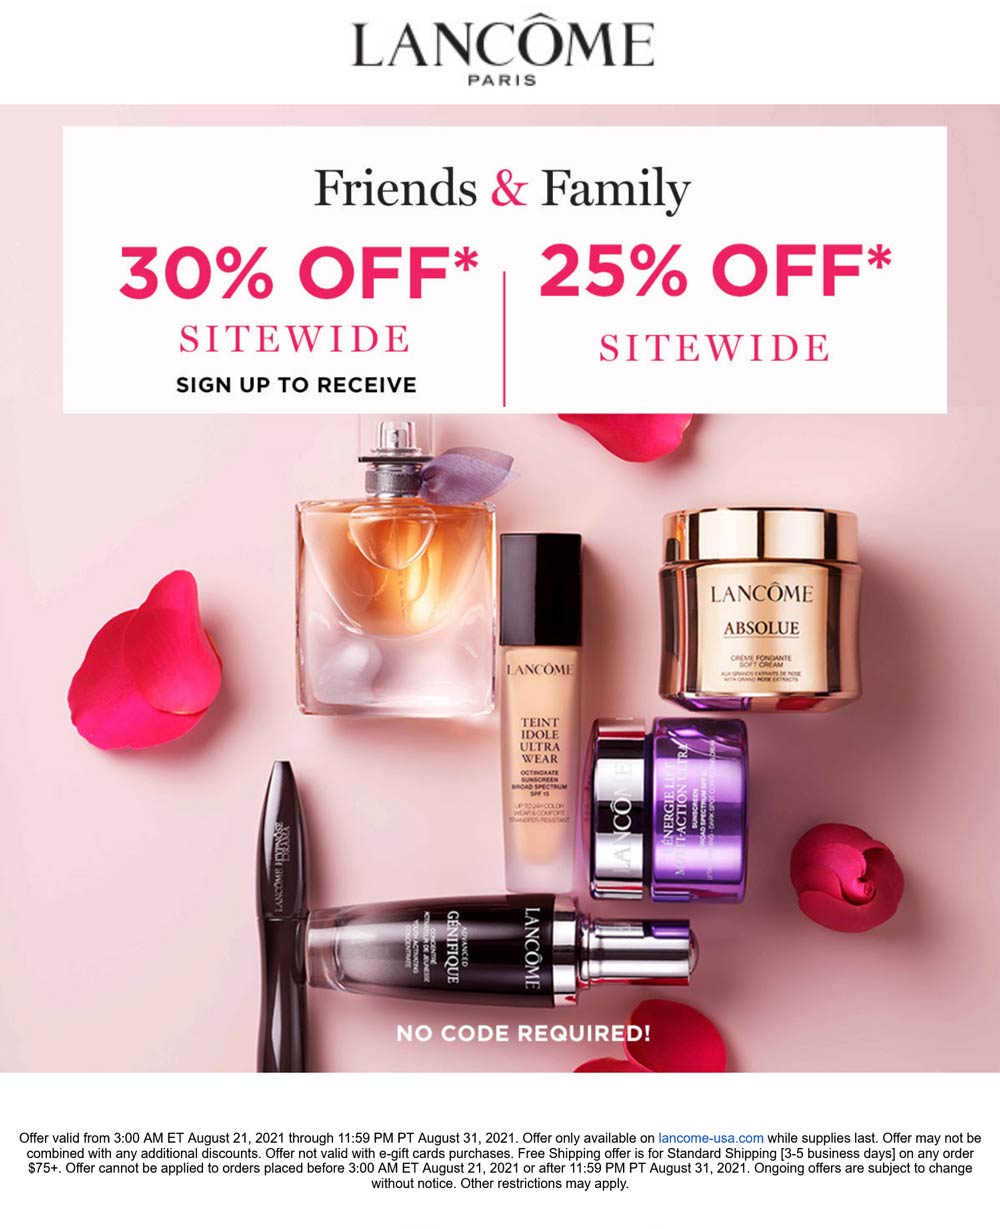 Lancome coupons & promo code for [December 2022]